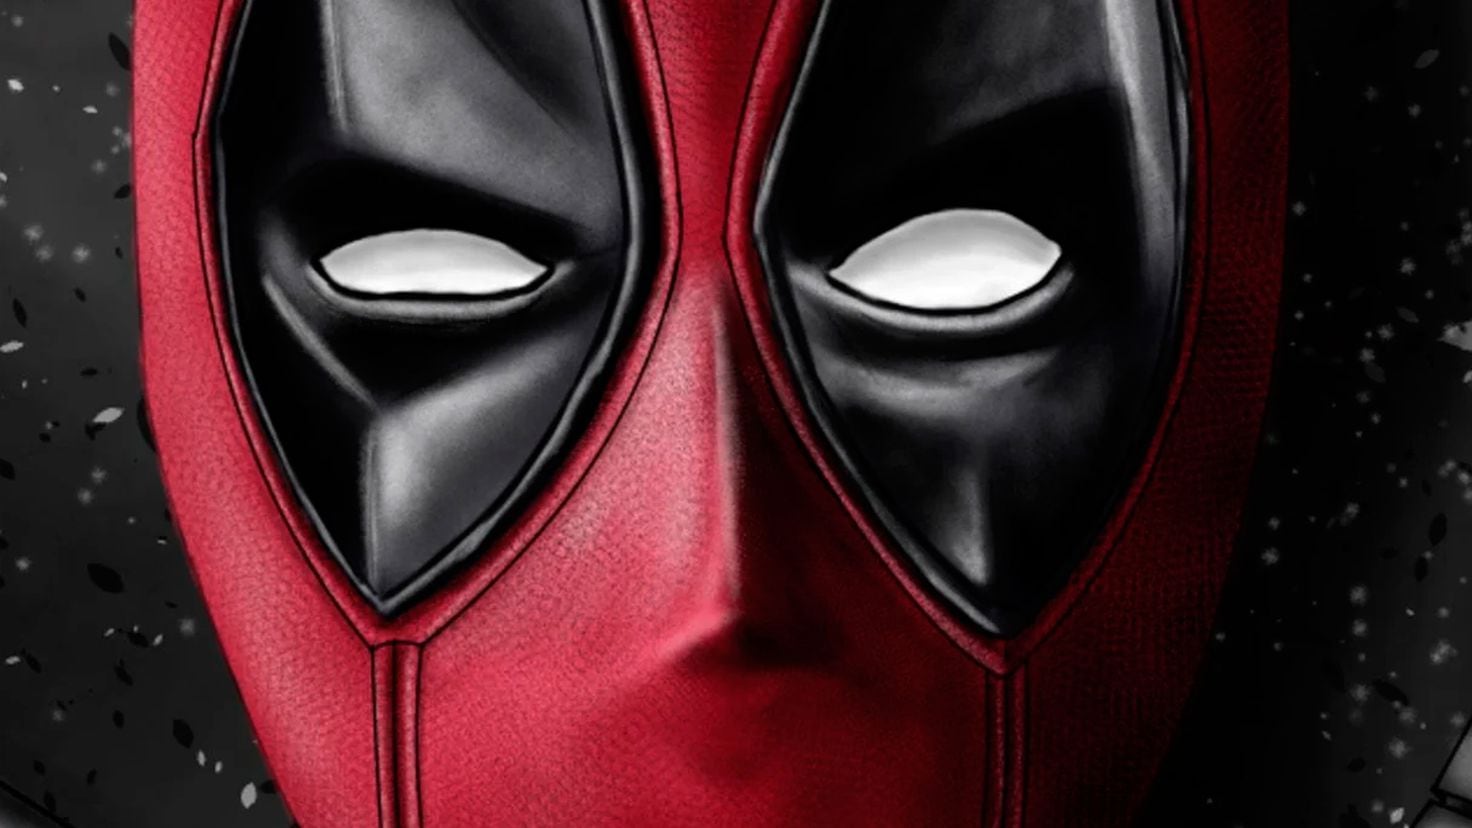 Deadpool 3, a 'Very Much R-rated' movie, halted mid-shoot by